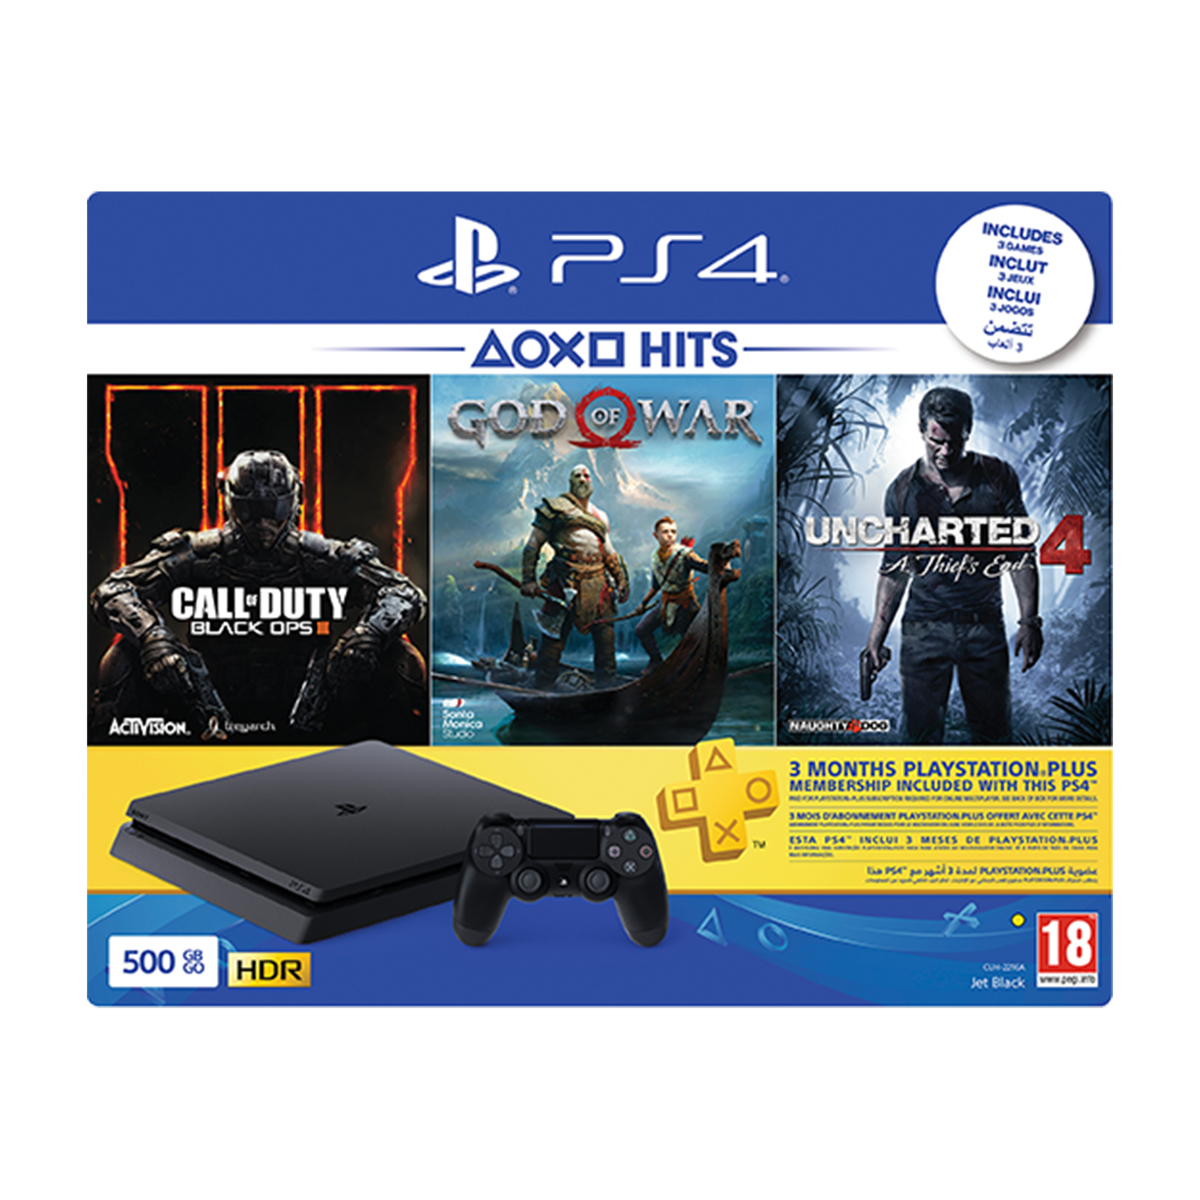 Sony PlayStation 4 500GB + Call of Duty Black Ops + God Of War + Uncharted 4 + PS Plus 90Days Subscription